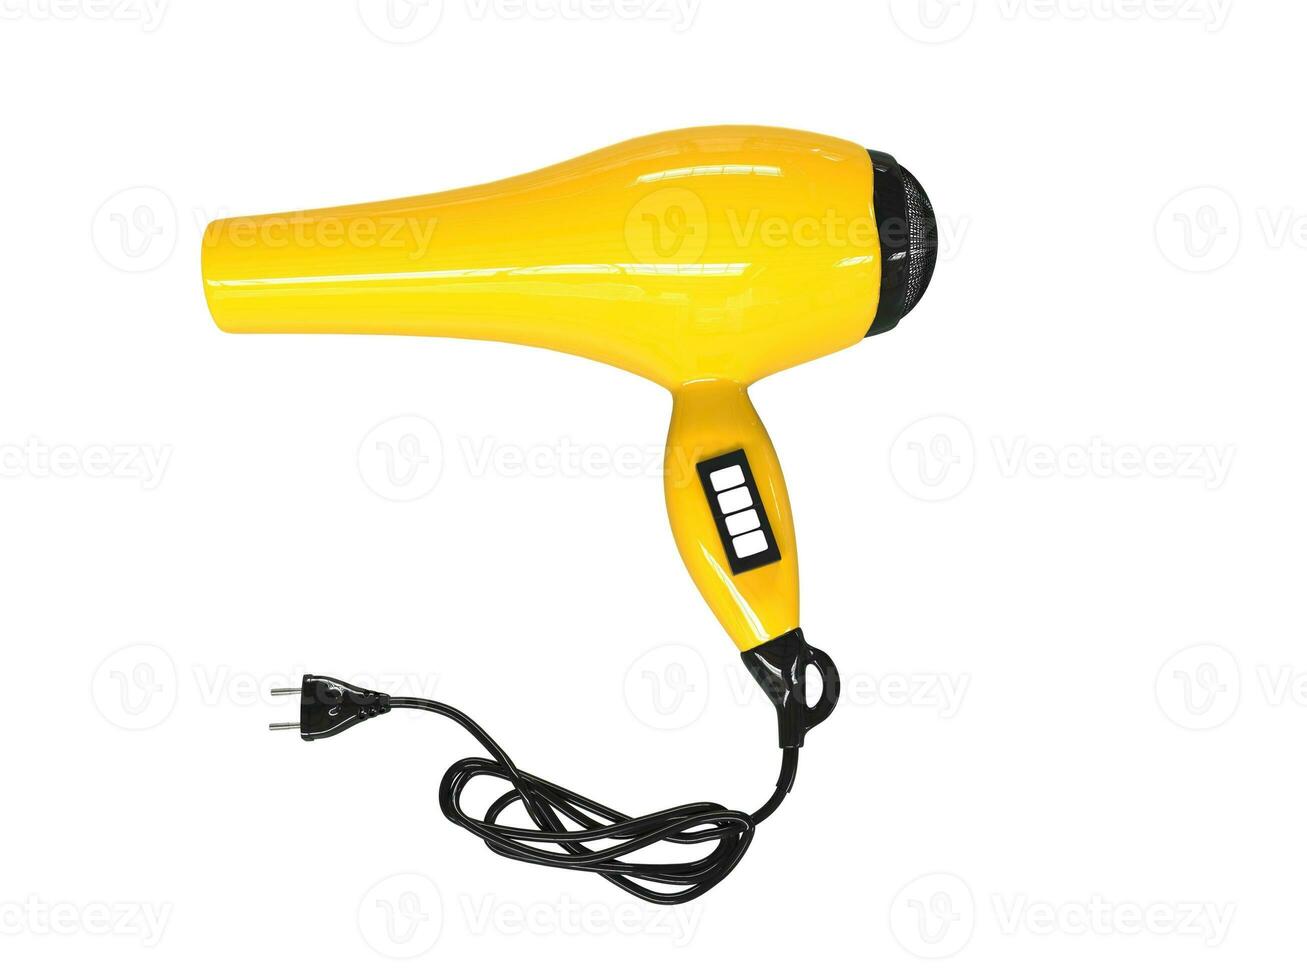 Classic yellow hairdryer, side view photo